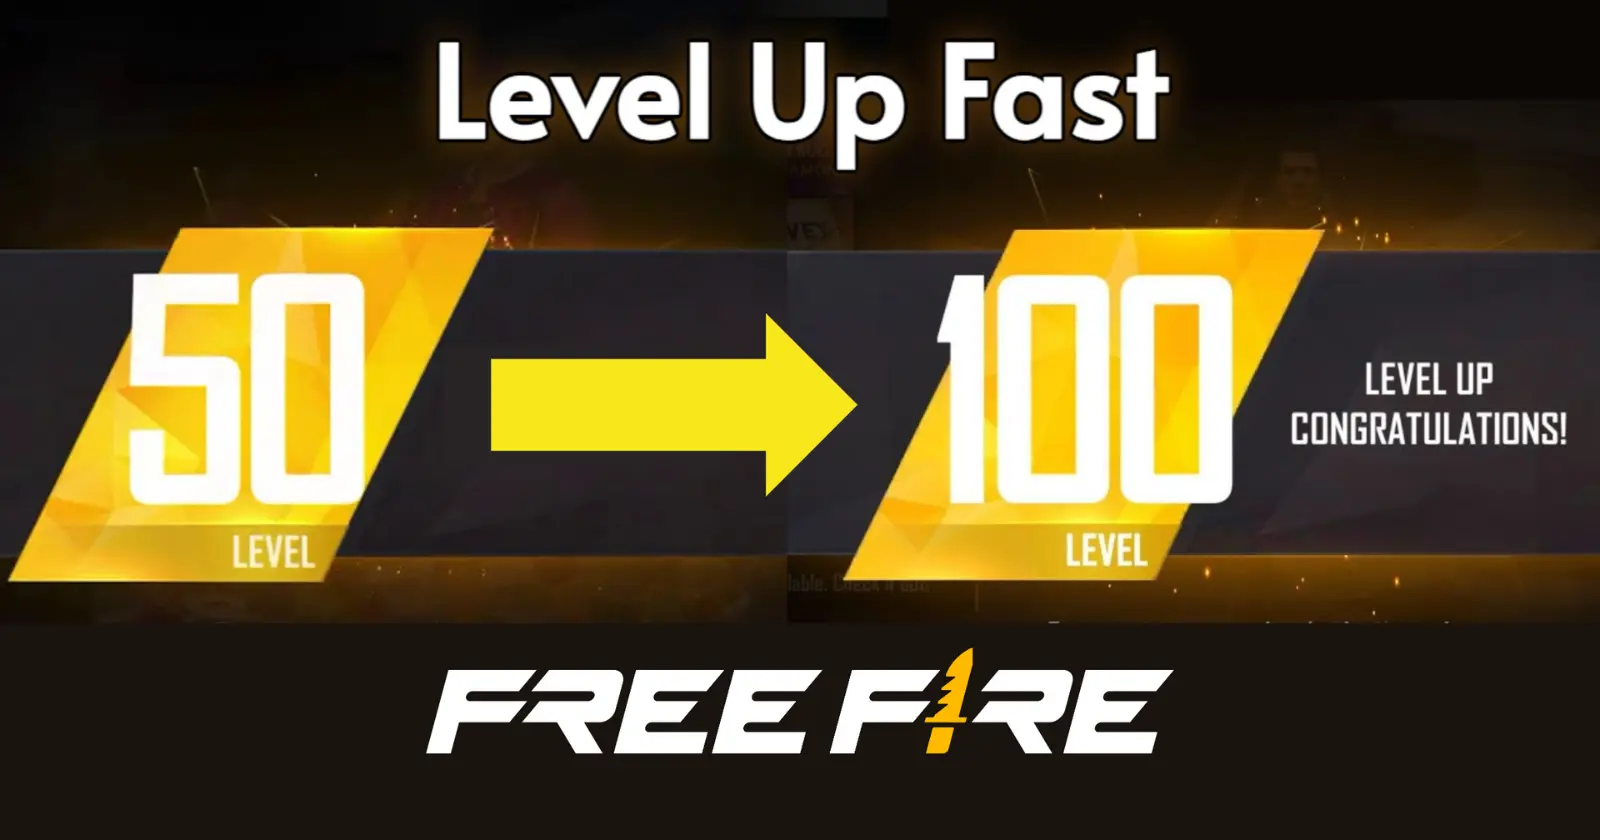 Free Fire showing progress from level 50 to 100 with 'Level Up Fast' and 'Level Up' text!